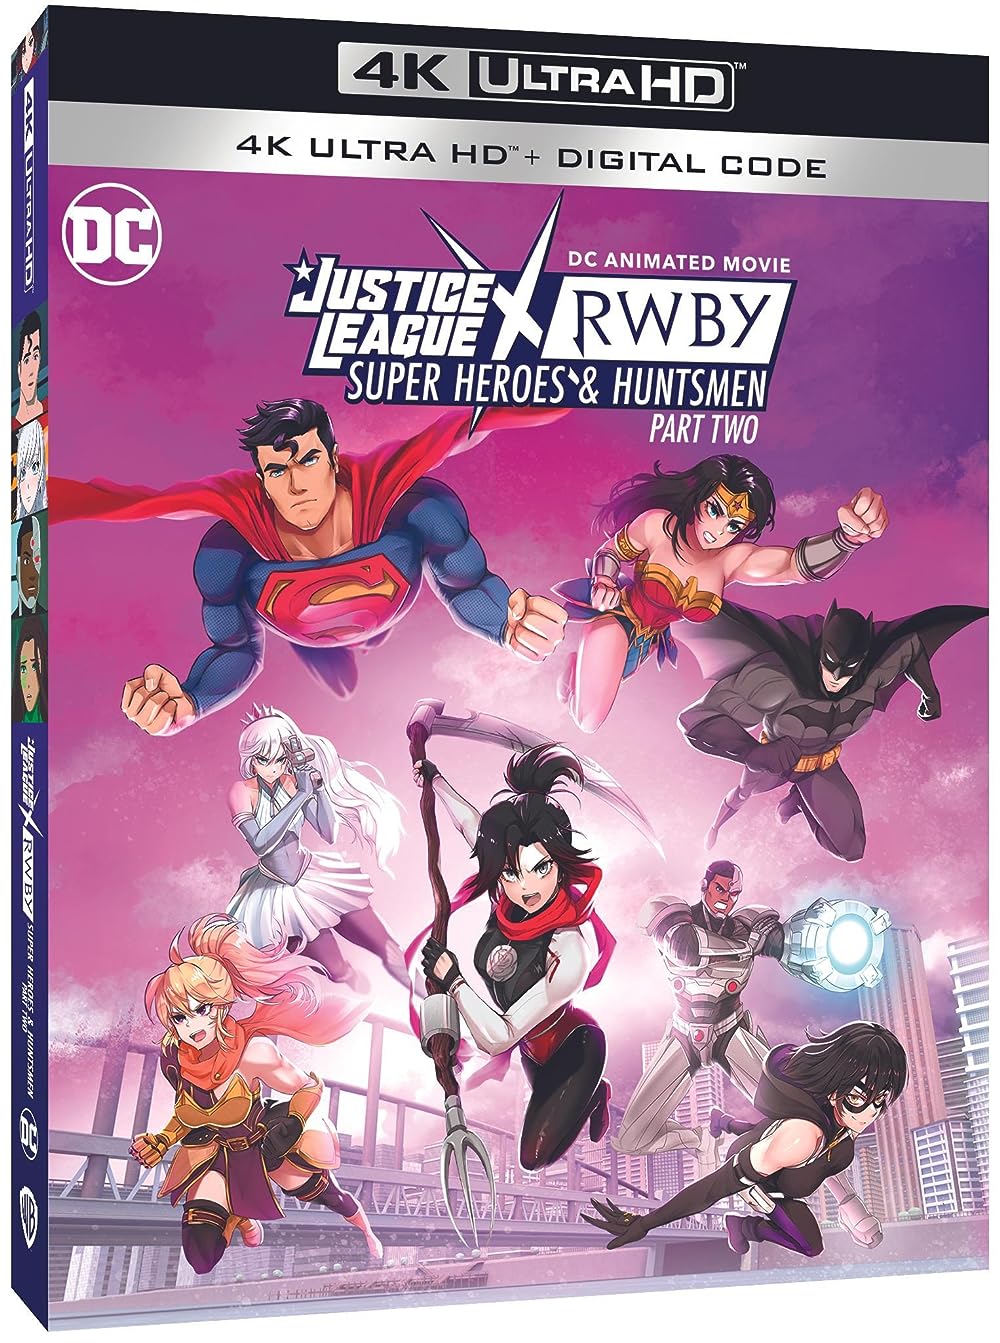 Justice League x RWBY: Super Heroes and Huntsmen, Part Two (Video 2023) DVD Release Date